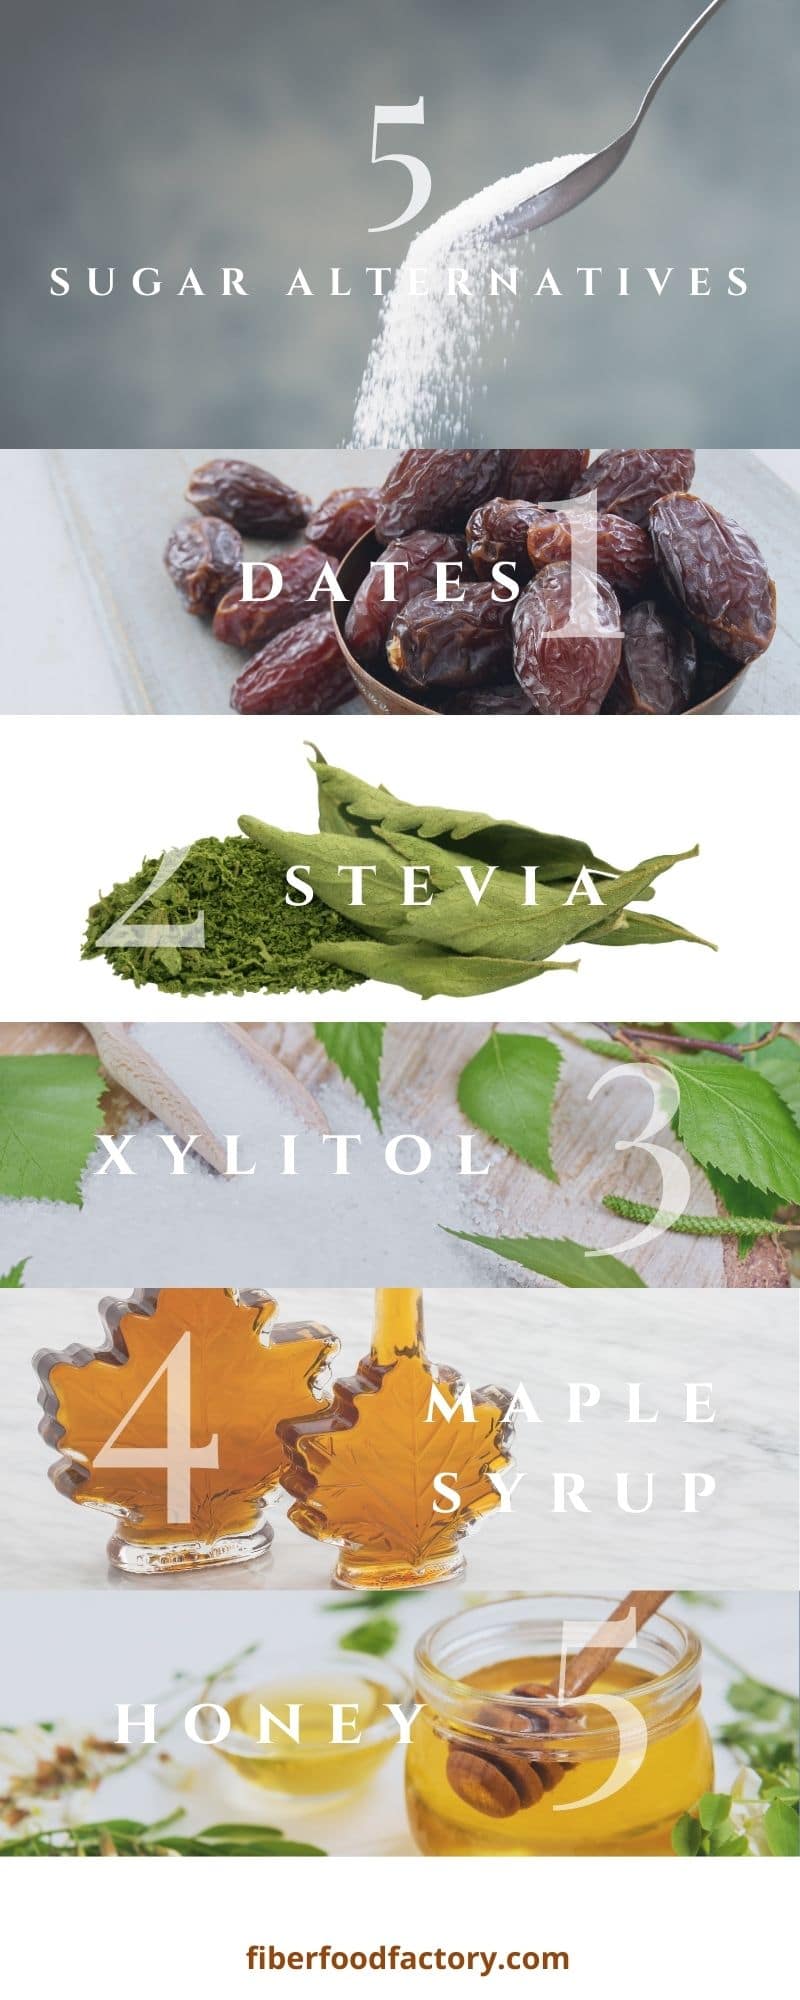 5 sugar alternatives as images, dates, stevia, xylitol, maple syrup and honey.